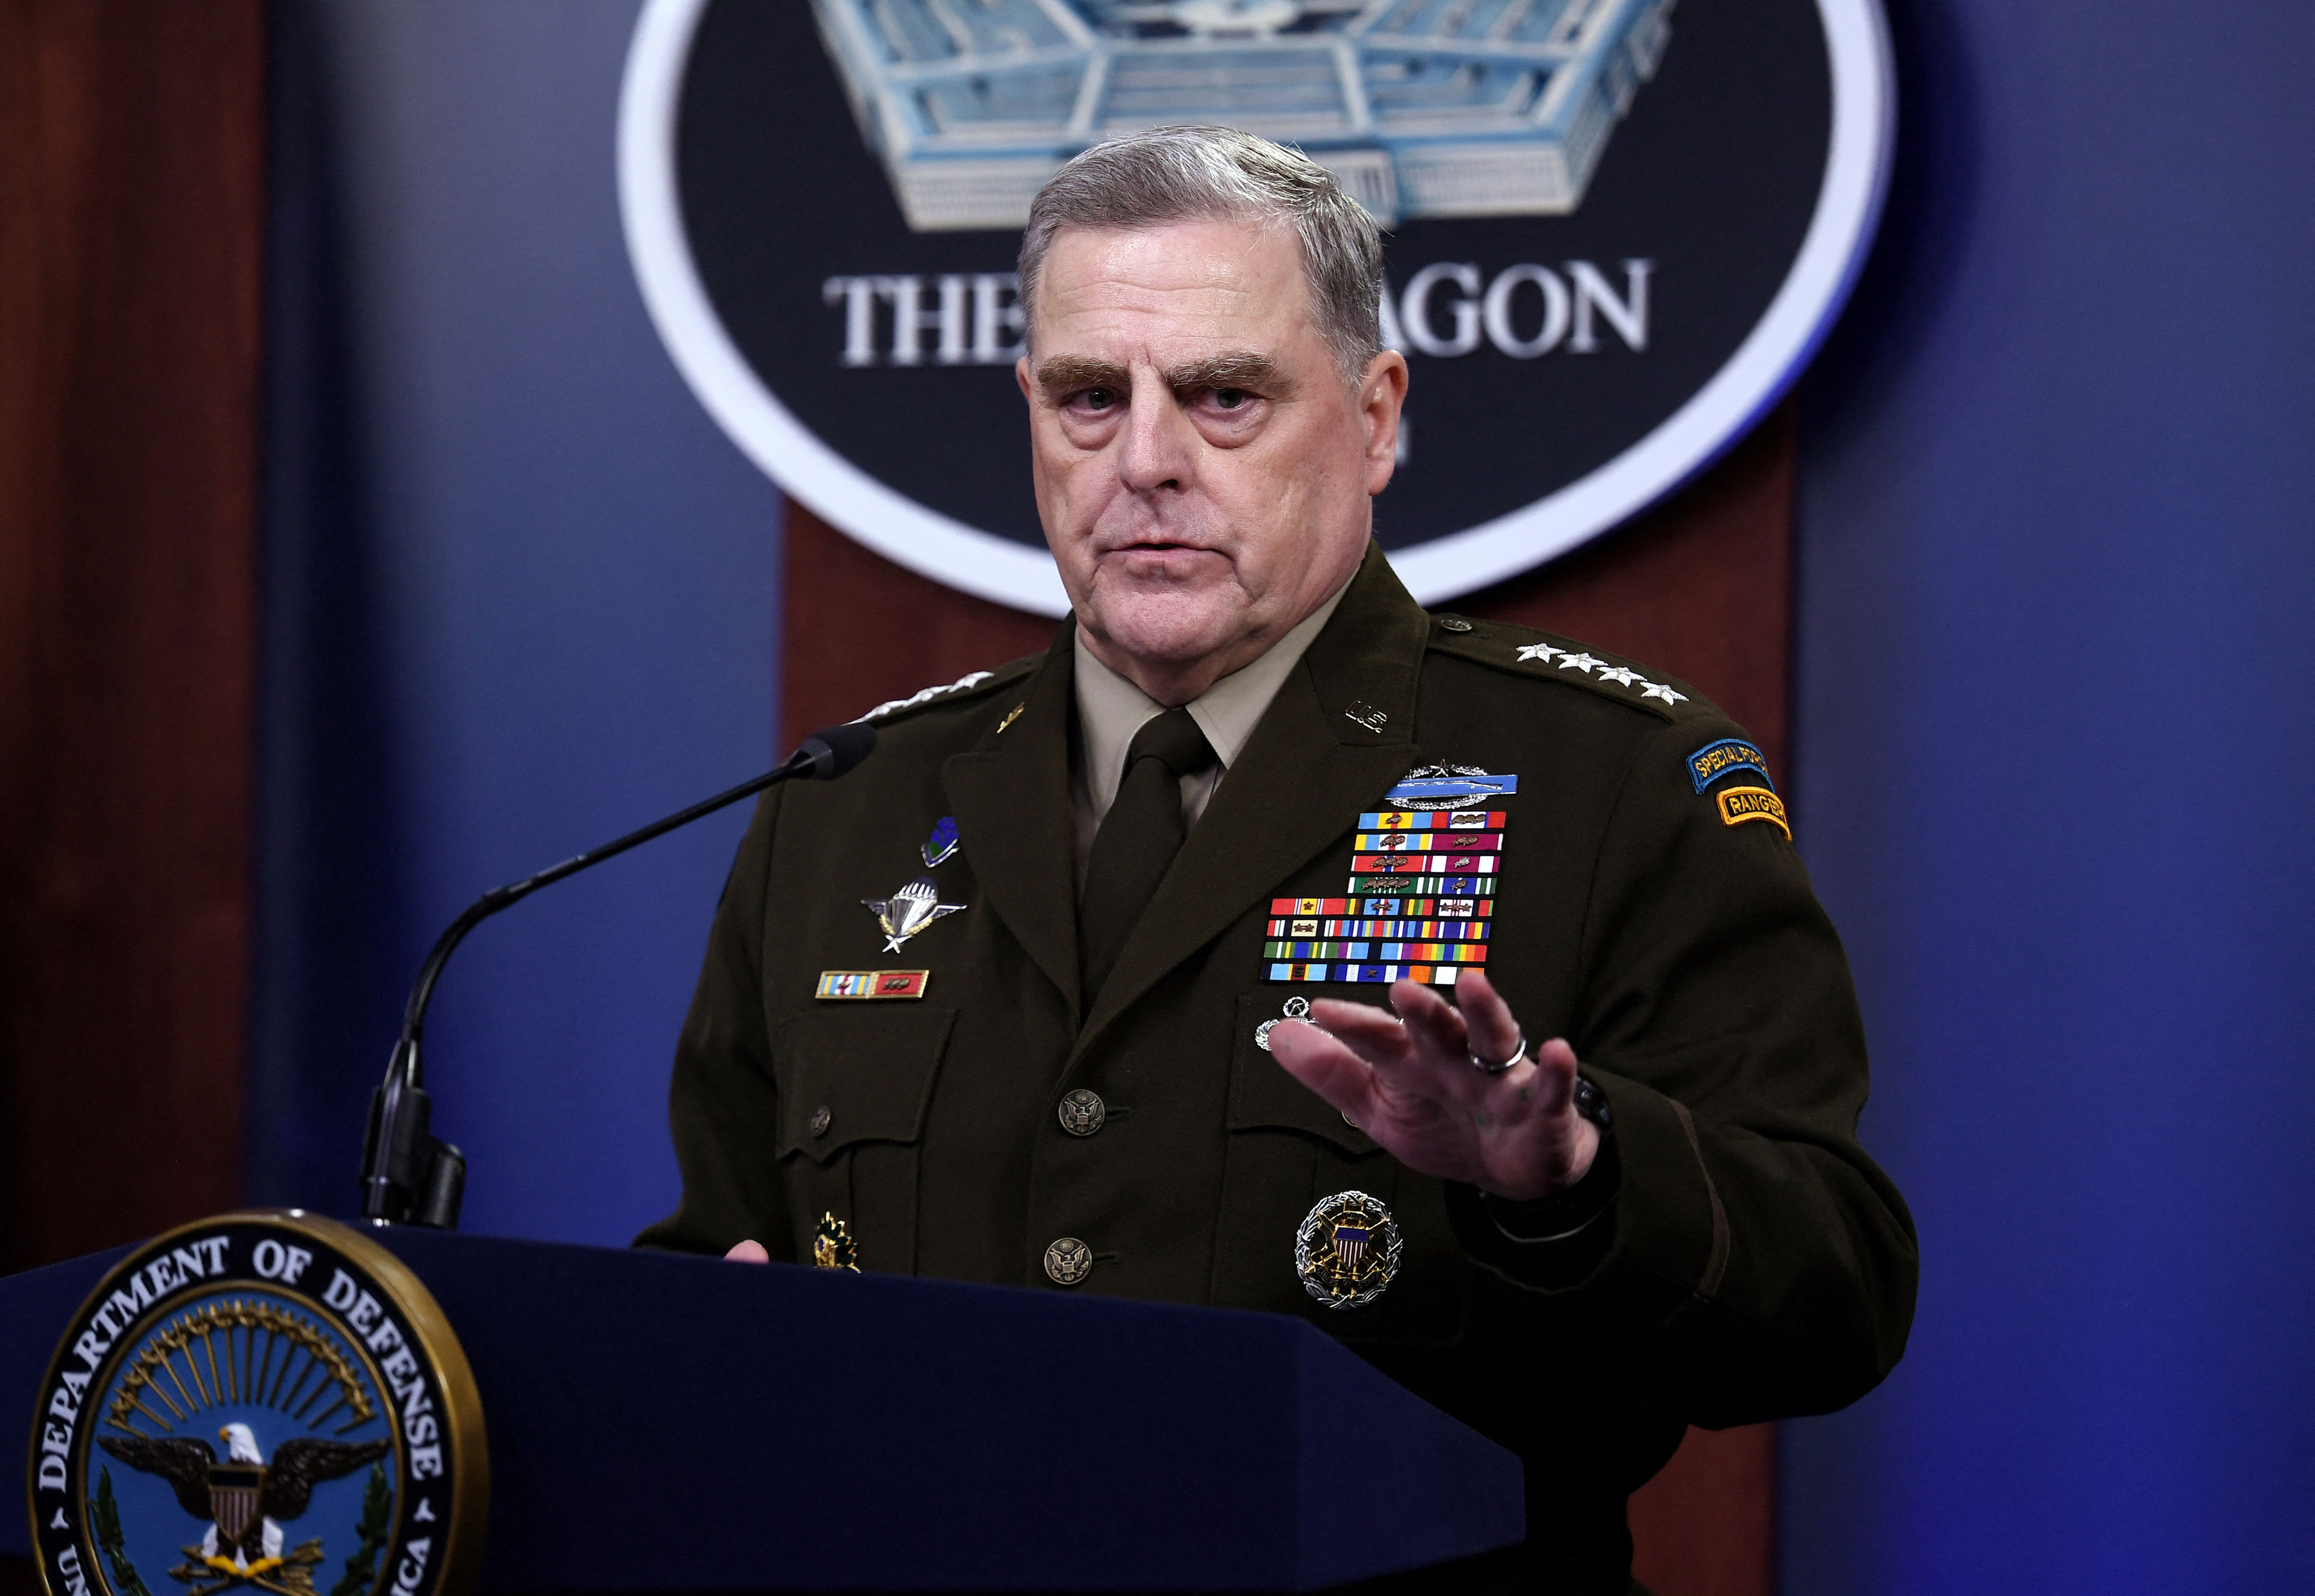 Chairman of the Joint Chiefs of Staff Gen. Mark Milley holds a press conference in Washington, DC, on July 21, 2021.